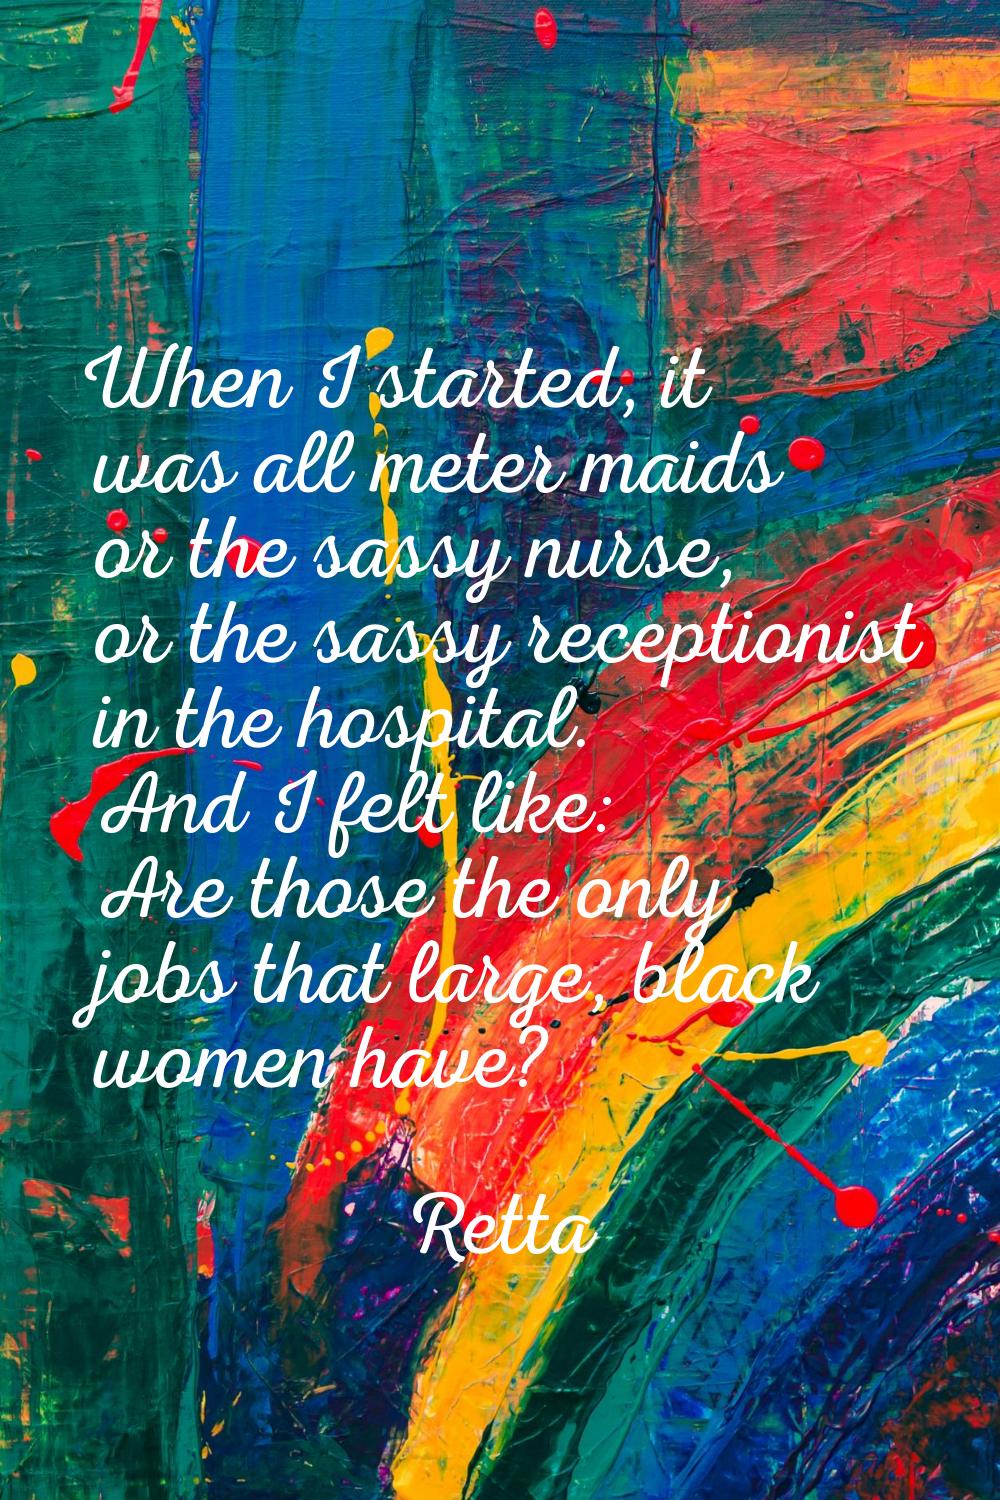 When I started, it was all meter maids or the sassy nurse, or the sassy receptionist in the hospita